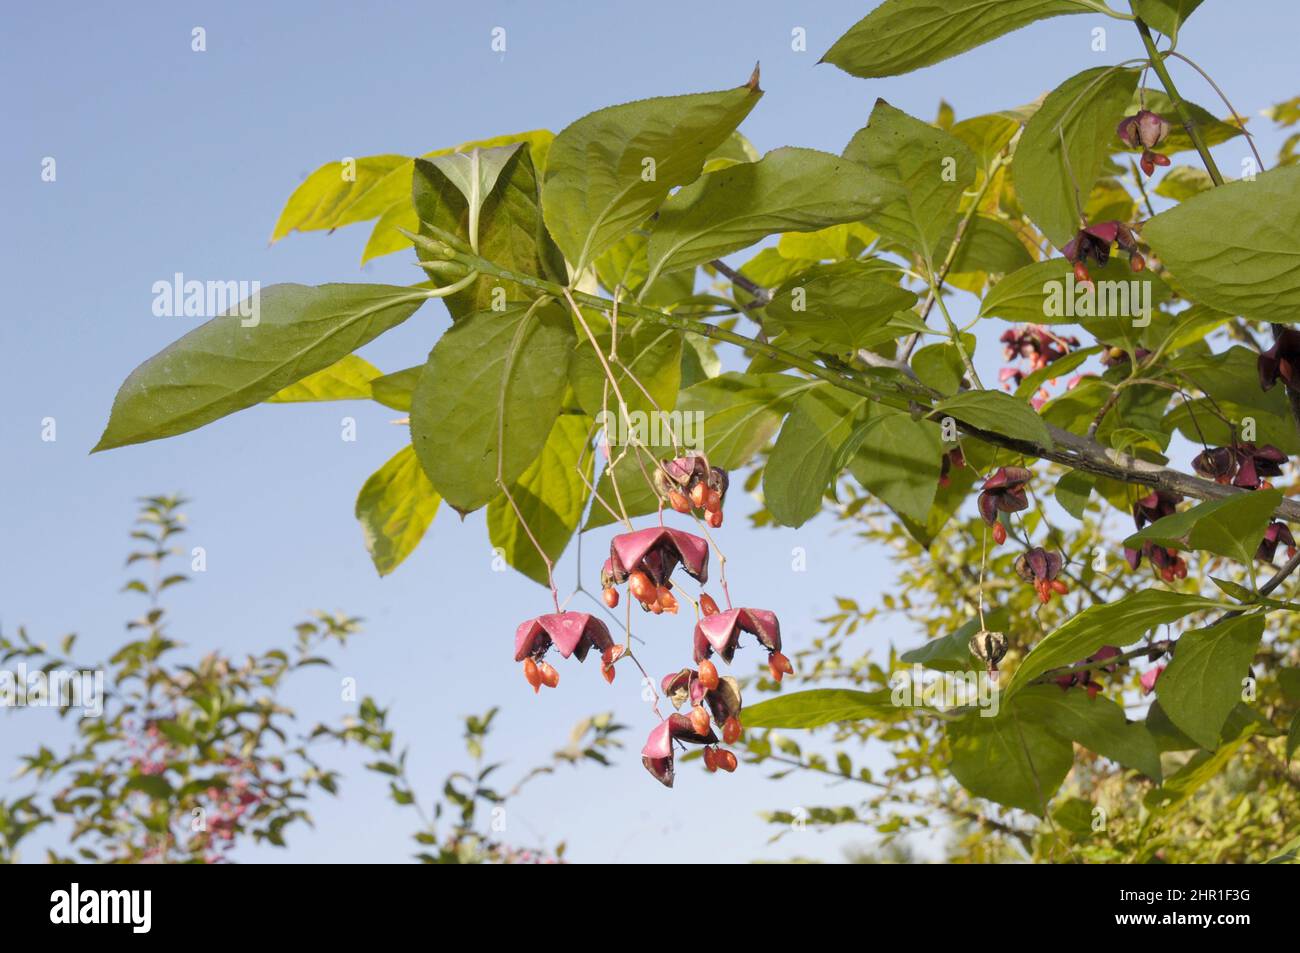 Dingle dangle tree (Euonymus planipes), branch with mature fruits Stock Photo